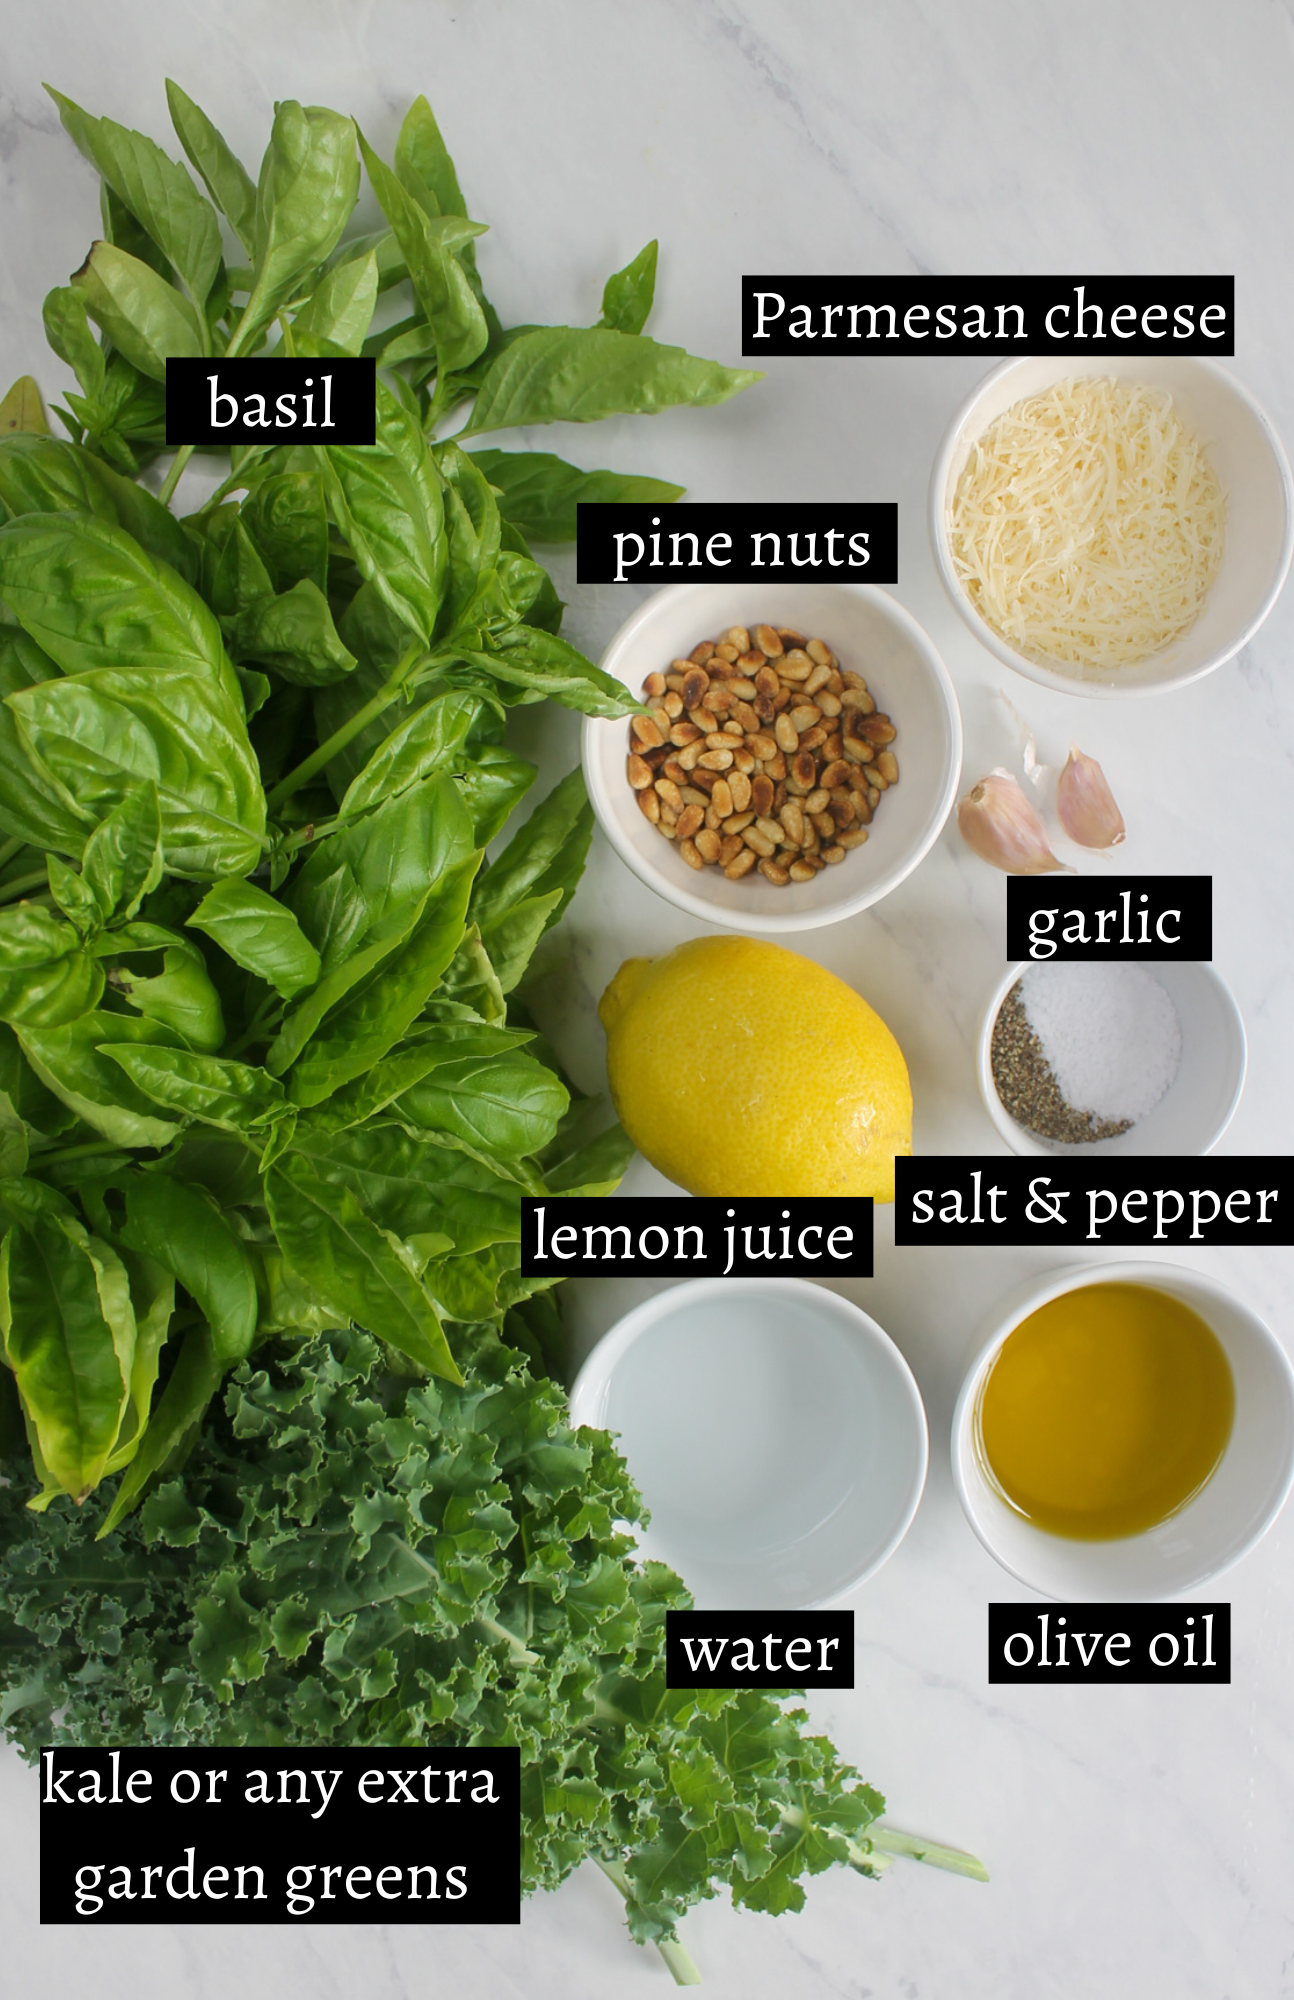 Labeled ingredients for garden pesto with basil and extra garden greens.